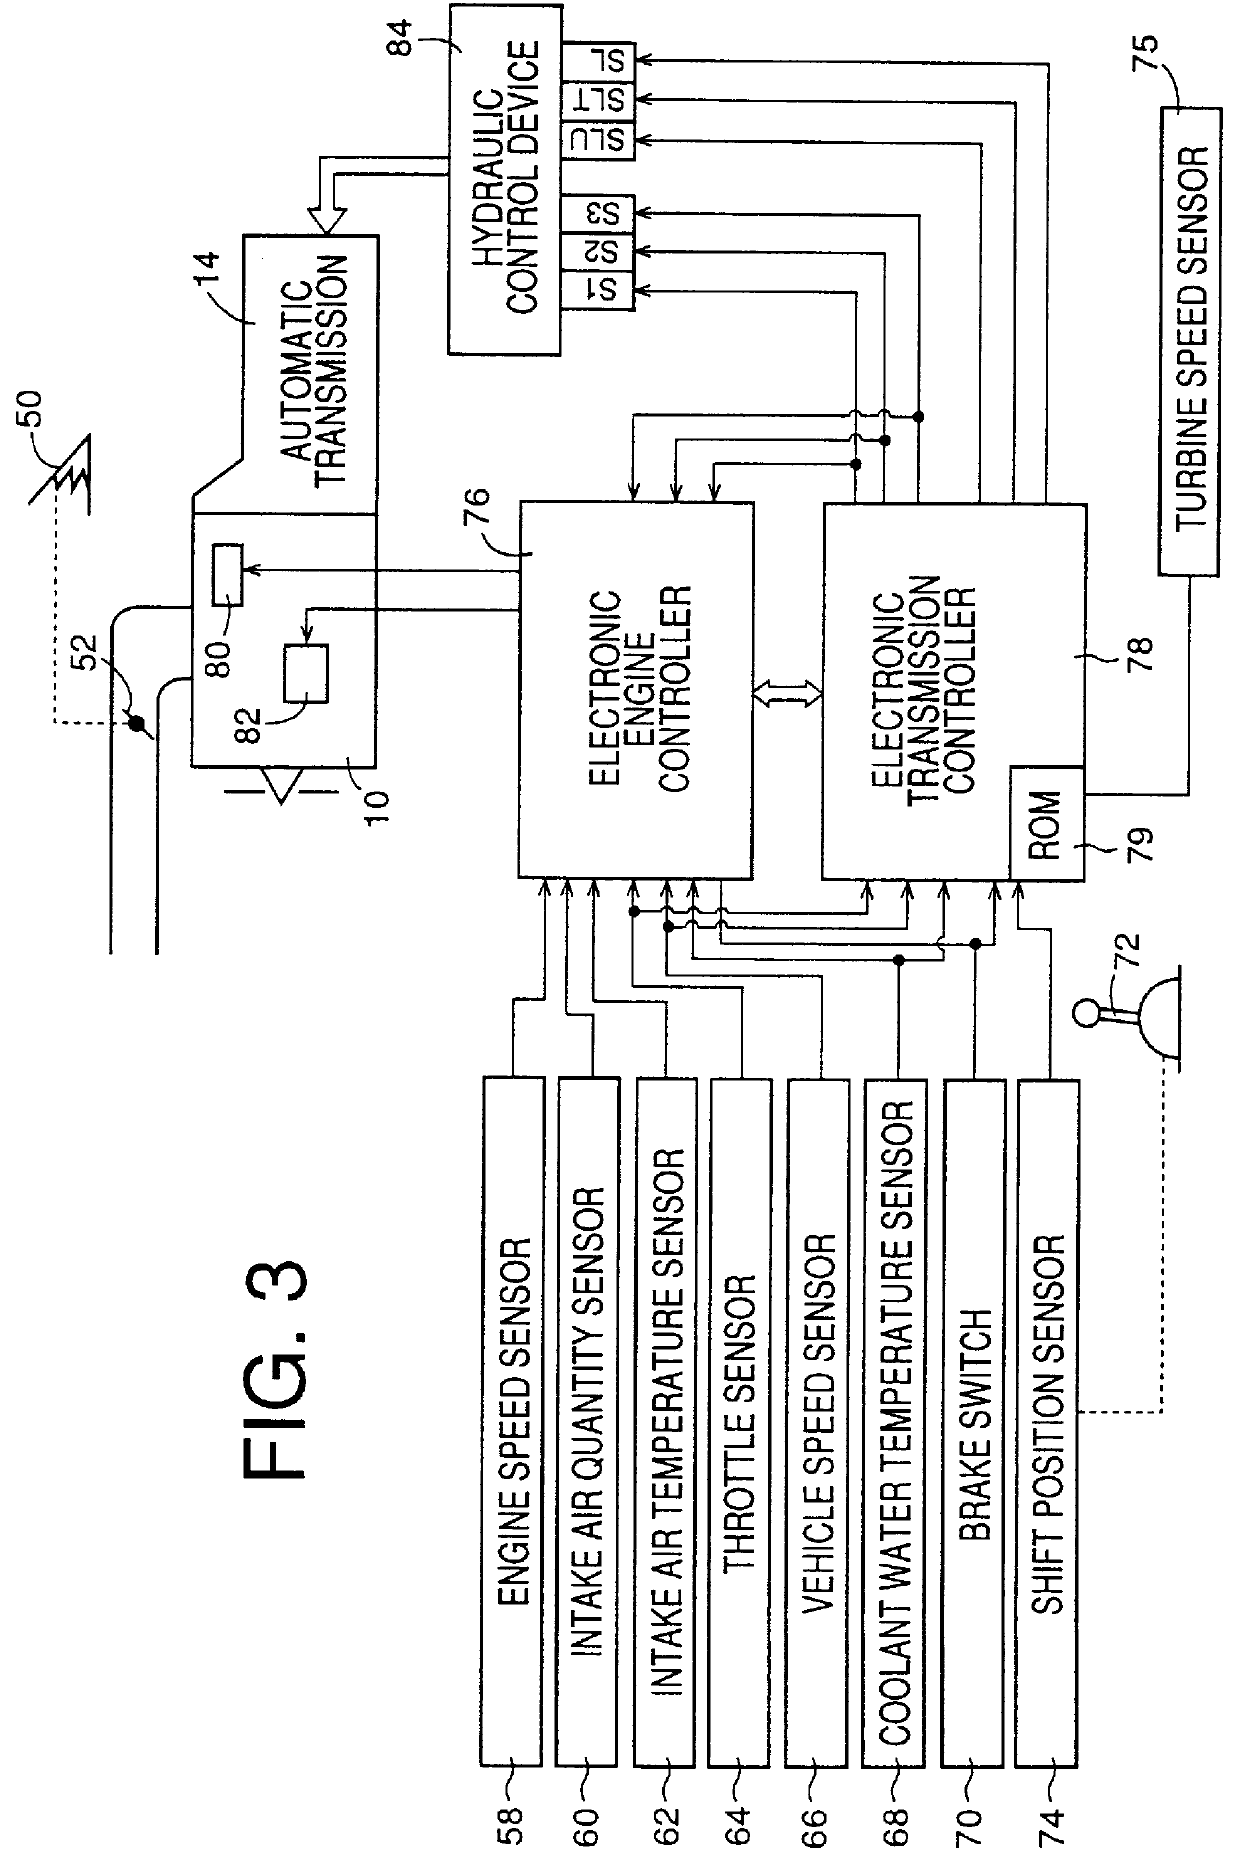 Apparatus for controlling pressure reduction of frictional coupling device to shift down automatic transmission of motor vehicle